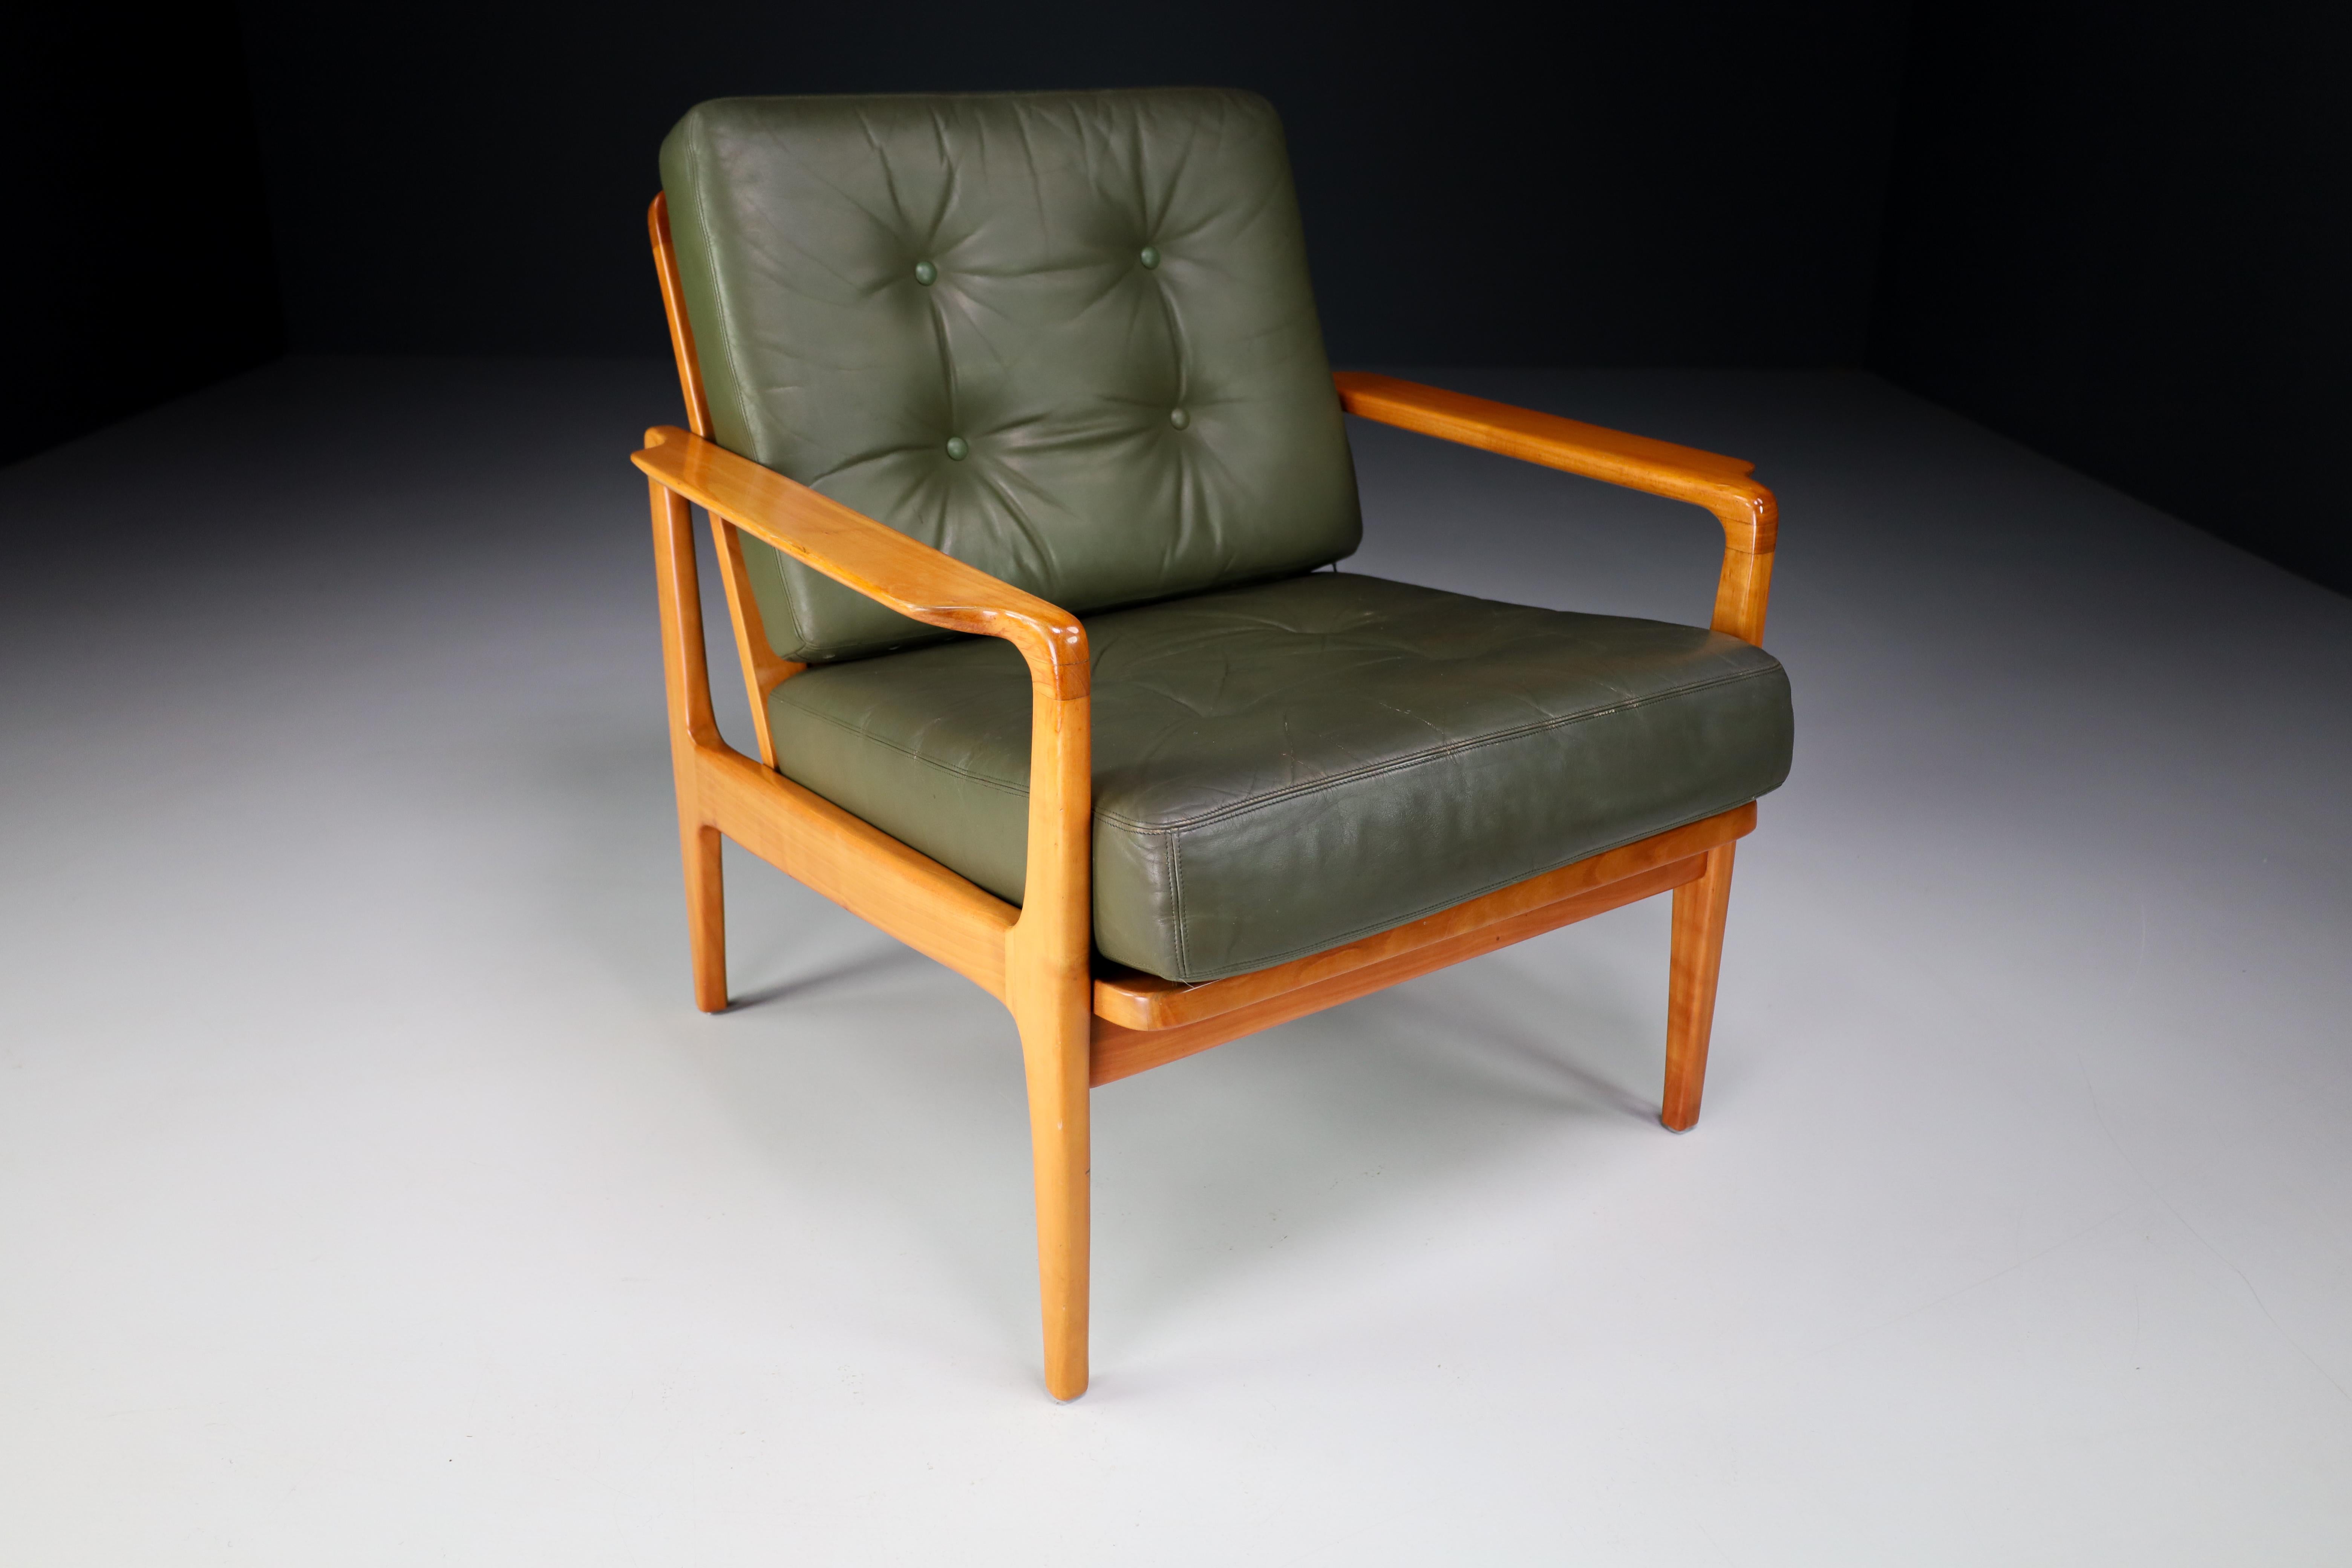 Scandinavian Modern Midcentury Danish Lounge Chairs by Arne Wahl Iversen in Green Leather, 1960s For Sale